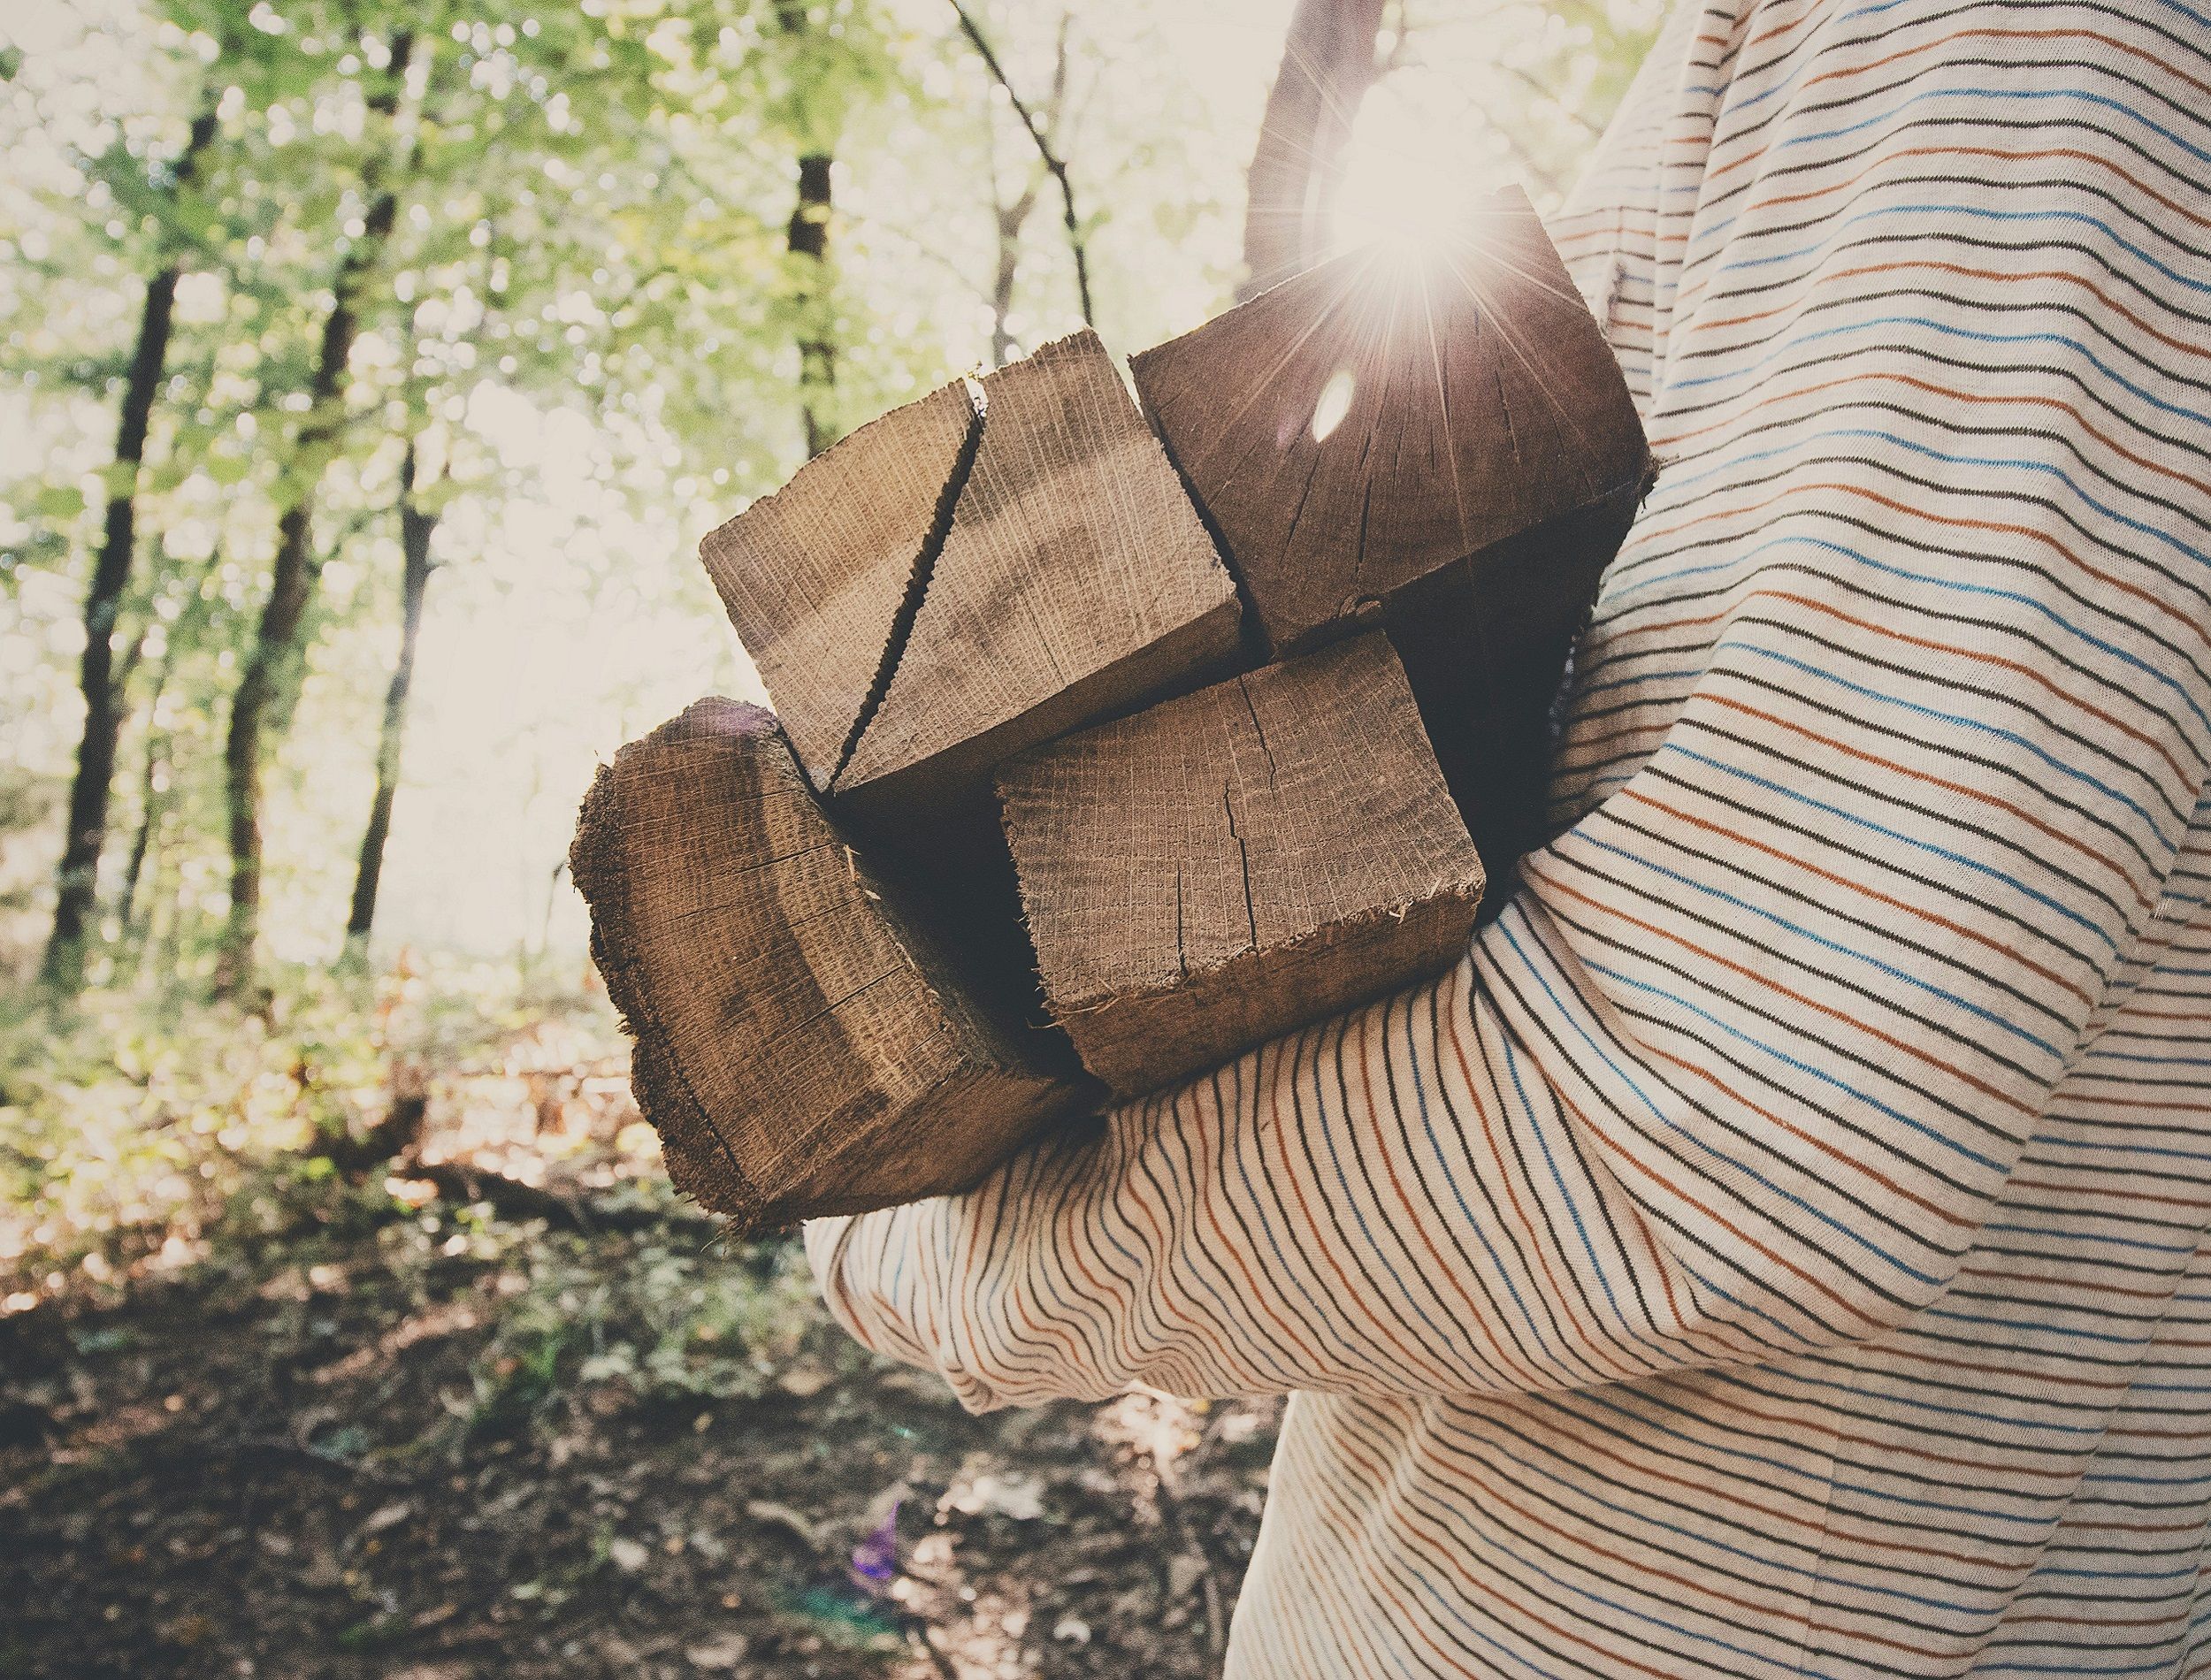 Carrying firewood in a wooded area with sunlight in the background